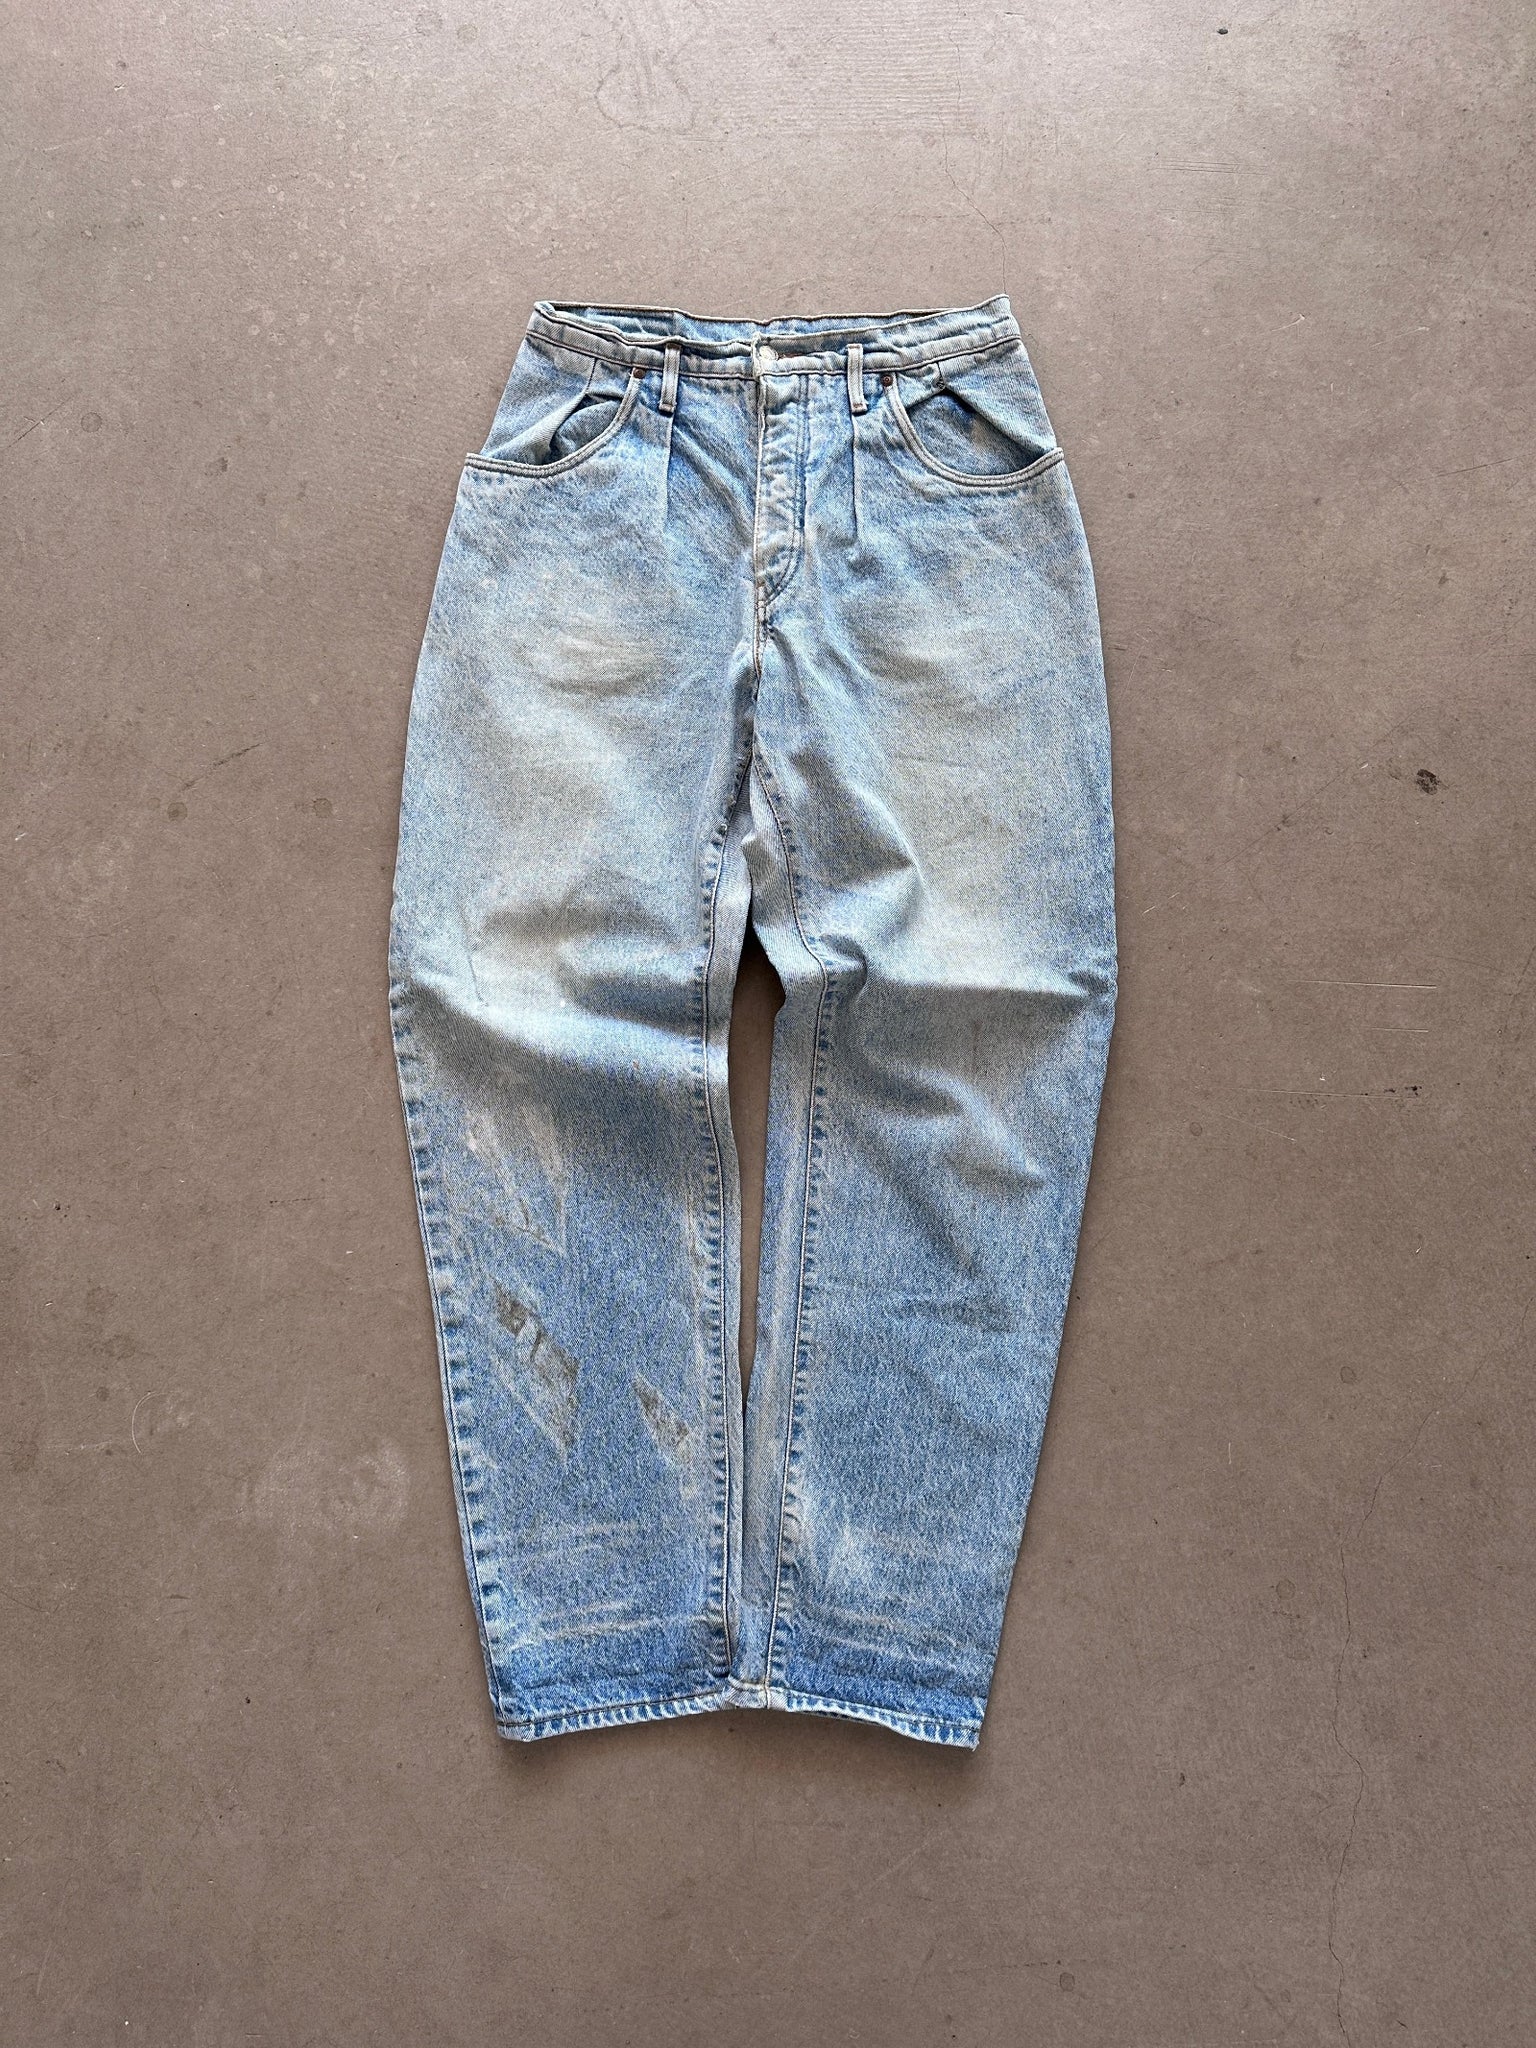 1990's Levi's Pleated Jeans - 30 x 33